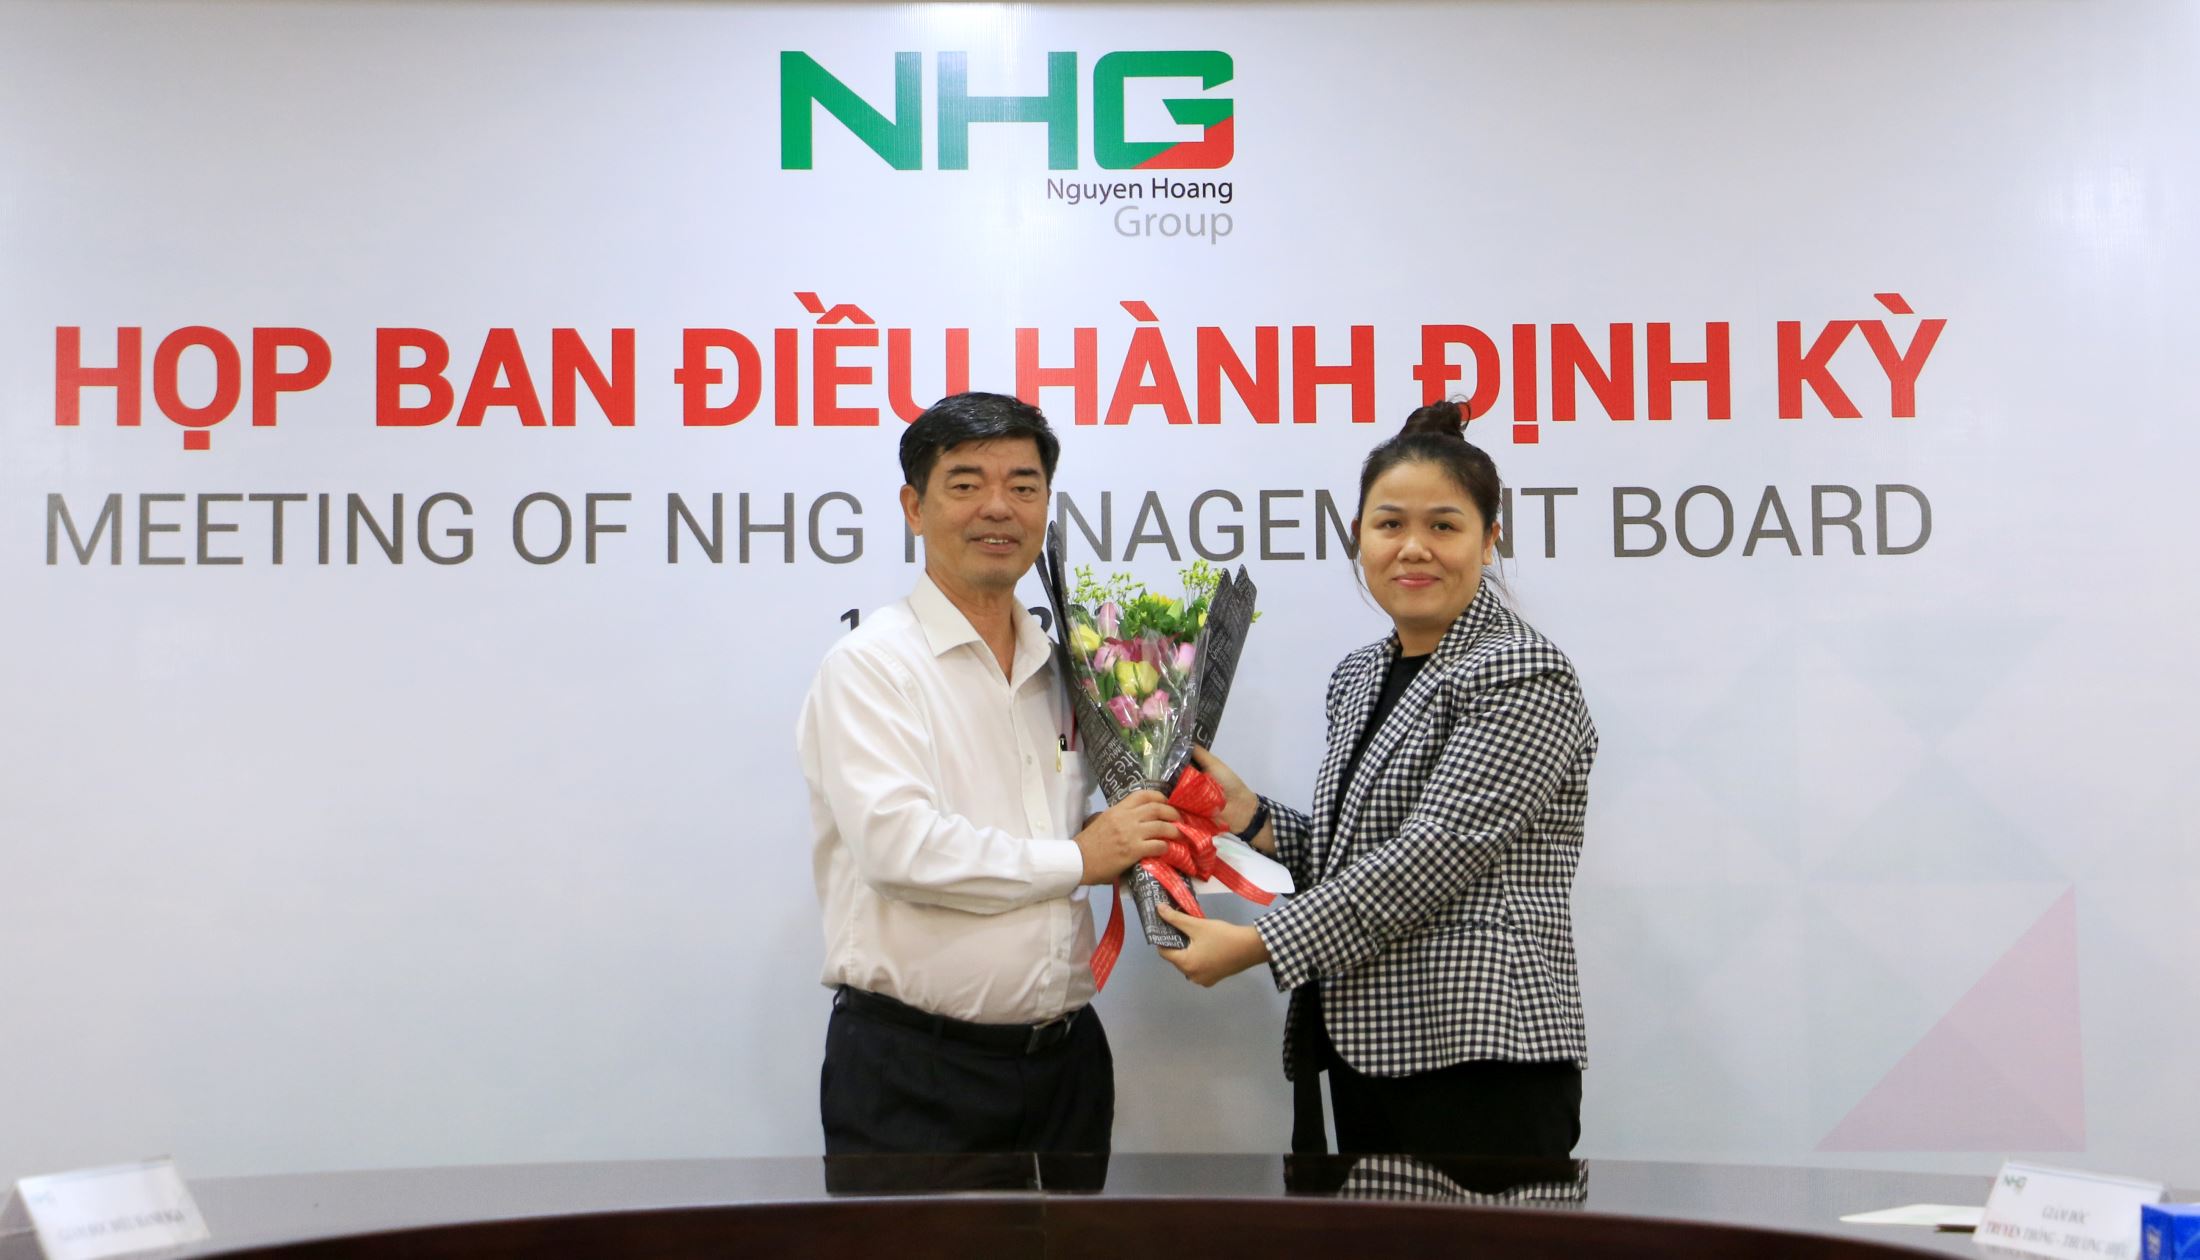 Ms. Hoang Nguyen Thu Thao – CEO of NHG delivering the appointment decision to have Associate Professor, Dr. Thai Ba Can – Deputy CEO, university development affairs as the director of the Univeristy Department and standing vice president of the University Council